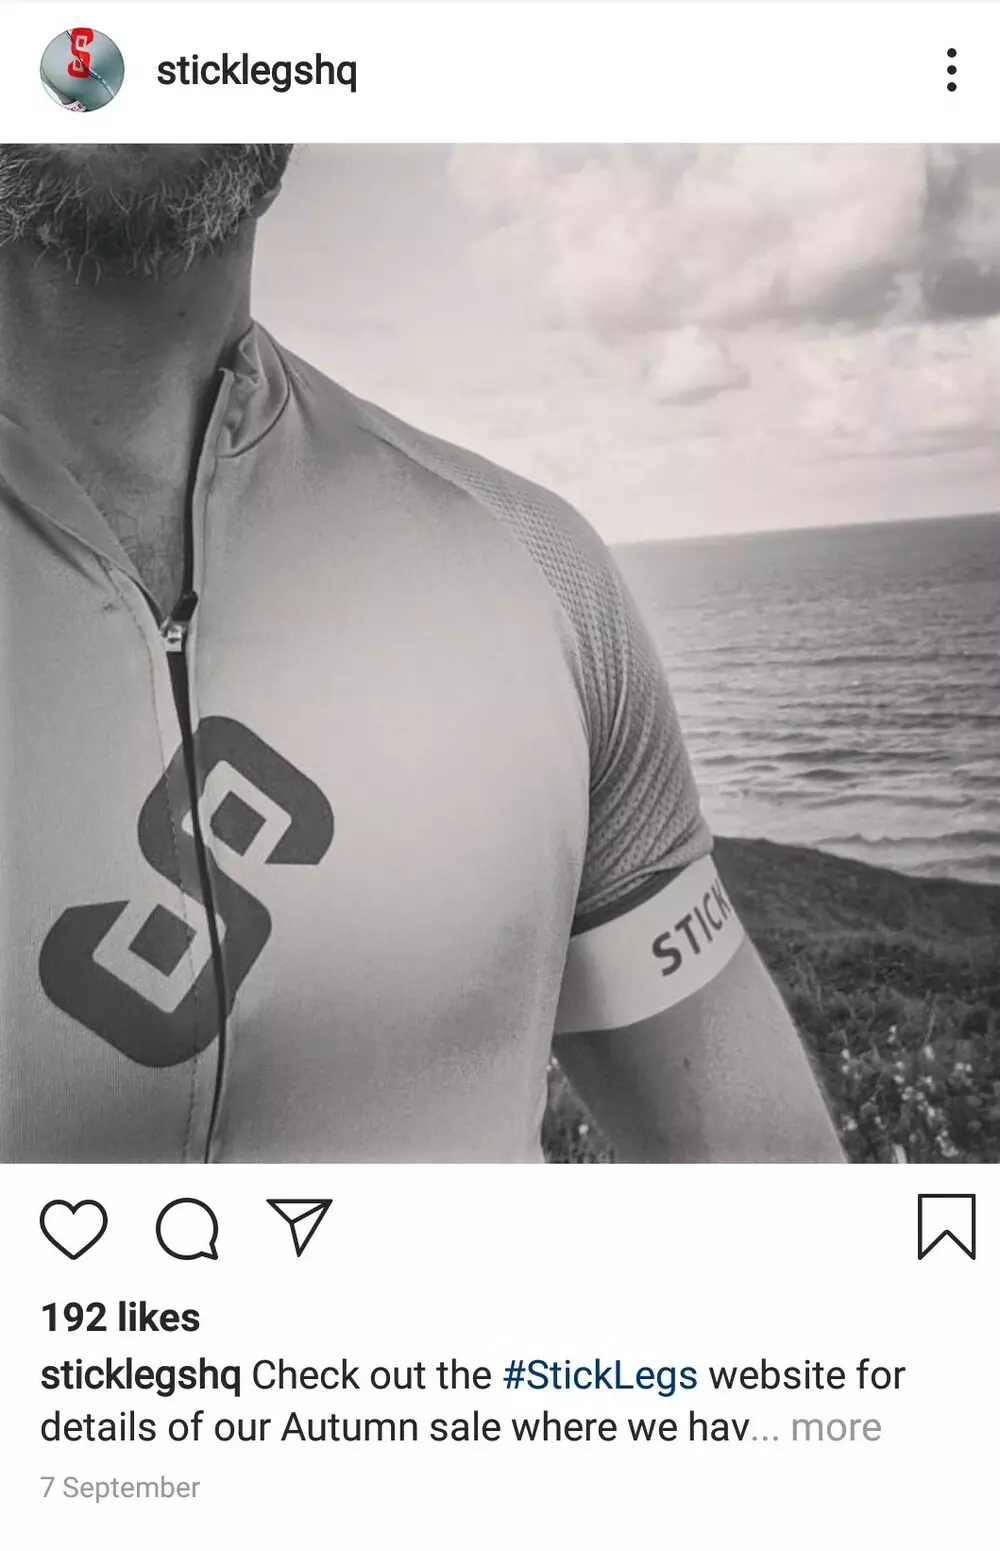 Image of the Sticklegs Jersey SL1 product